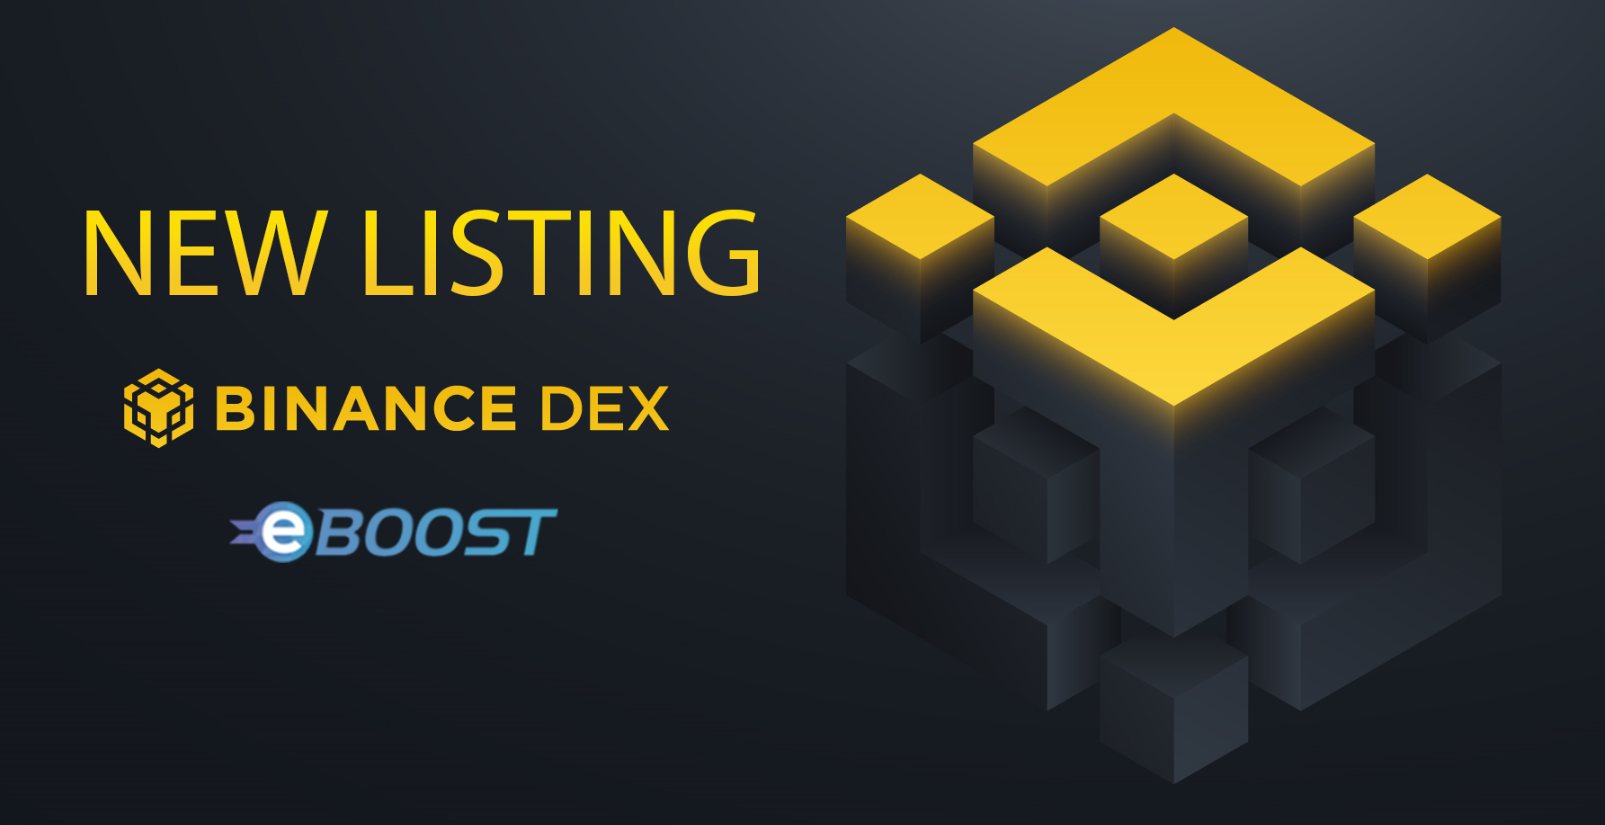 eSports Token eBoost to be Listed on Binance DEX